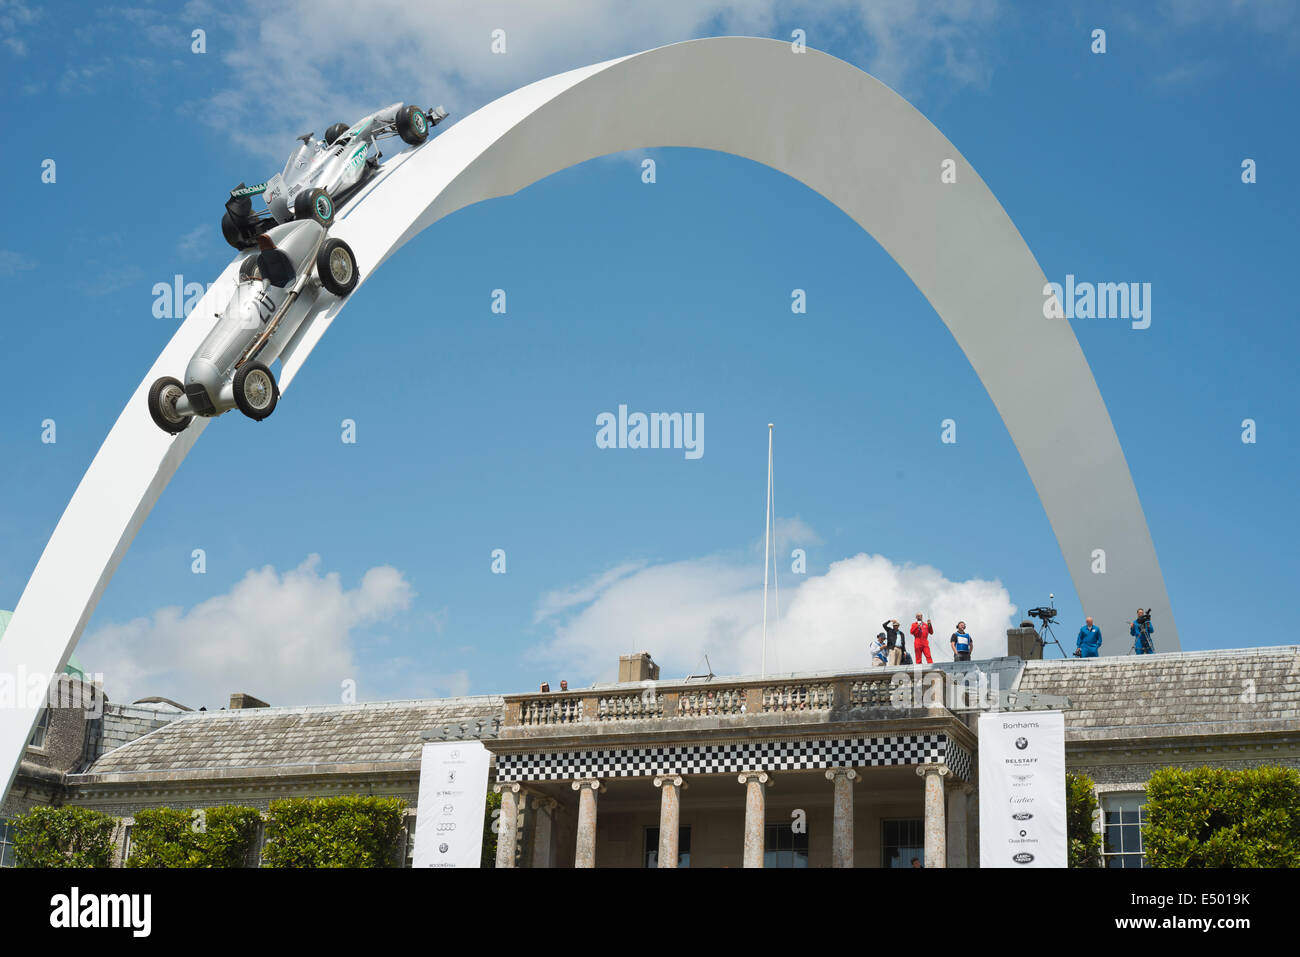 Mercedes sculpture by Gerry Judah at Goodwood Festival of Speed 2014 Stock Photo